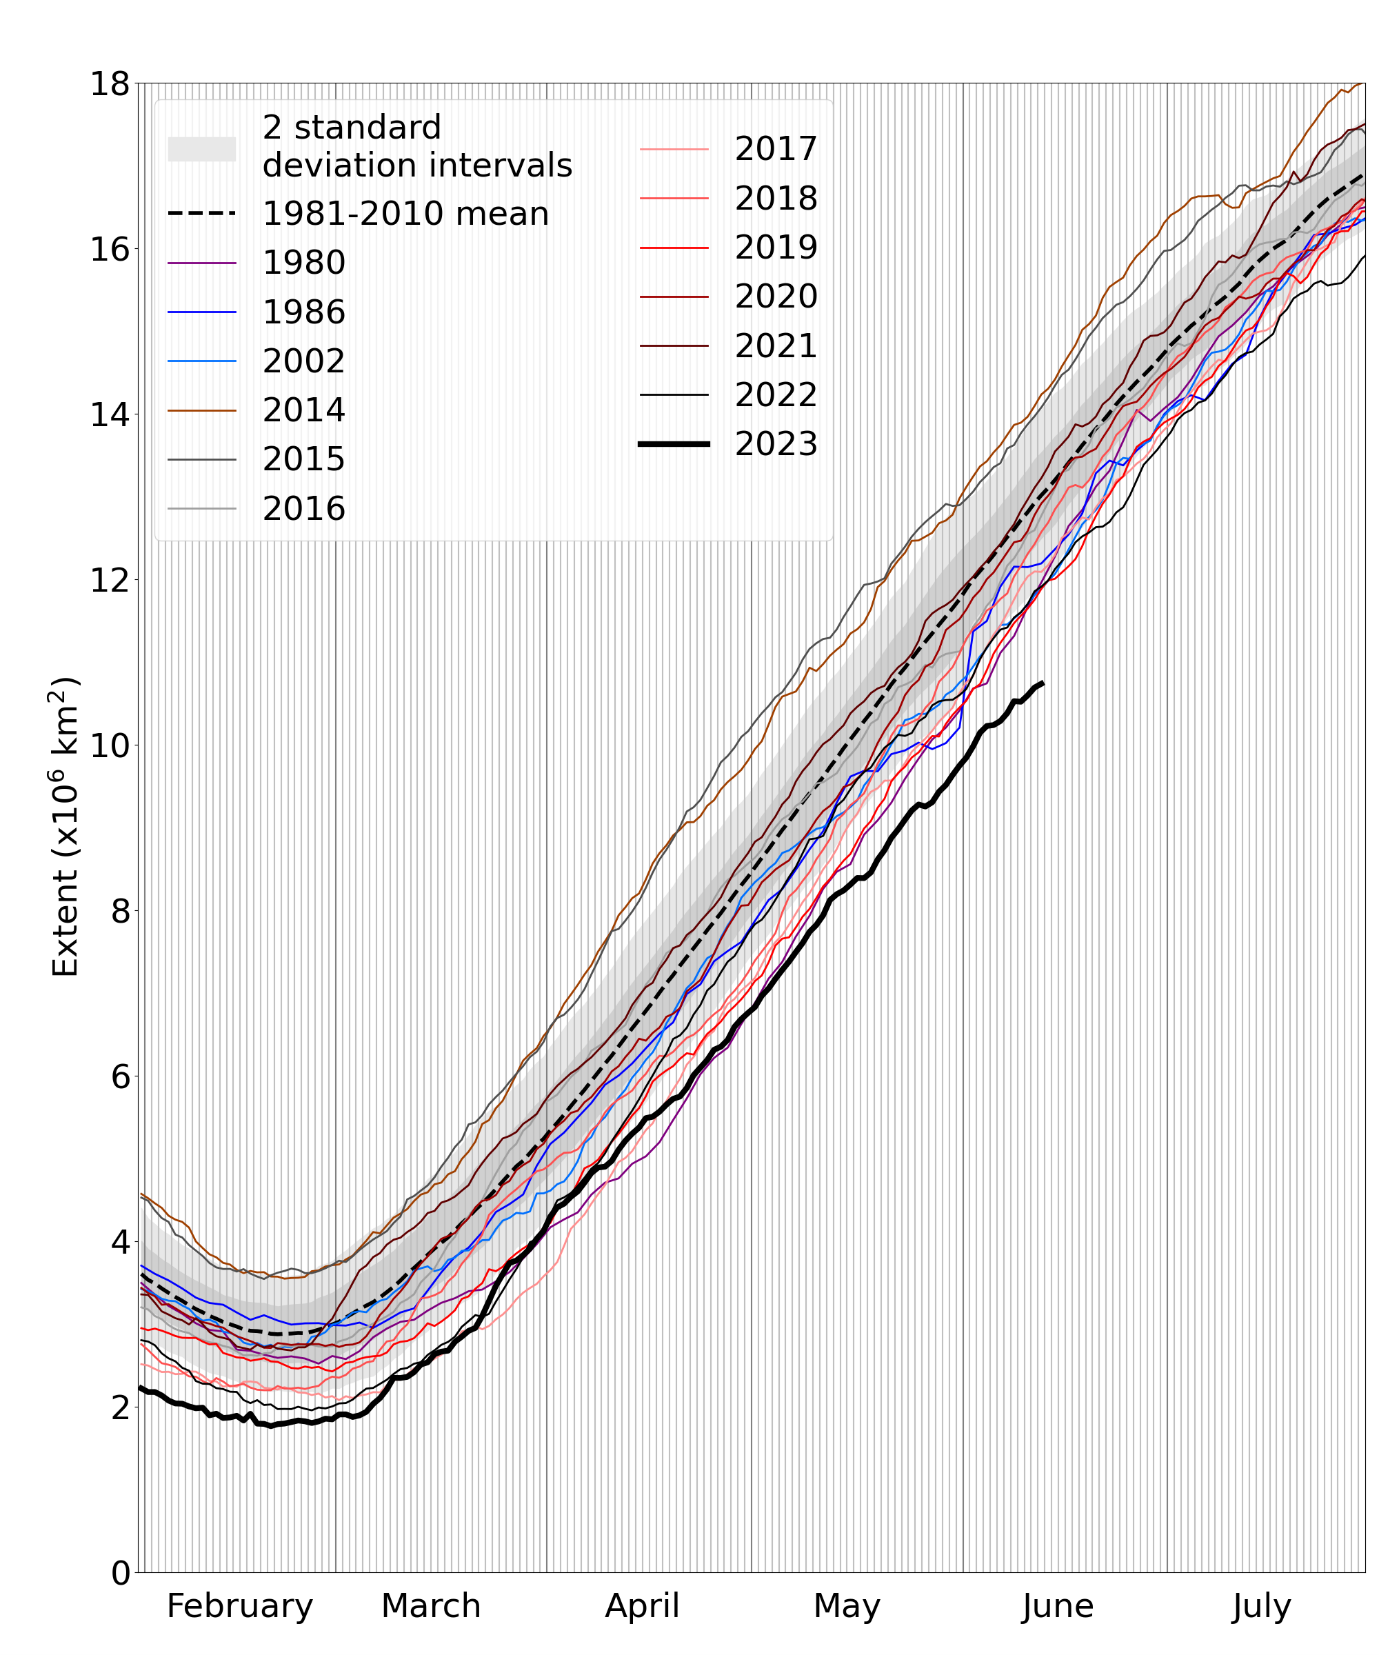 Daily Antarctic sea ice extent for 2023, compared with recent years and the low ice years of 1980, 1986 and 2002. Also shown is the 1981-2010 average with ± 1 and 2 standard deviation intervals indicated by shaded areas.